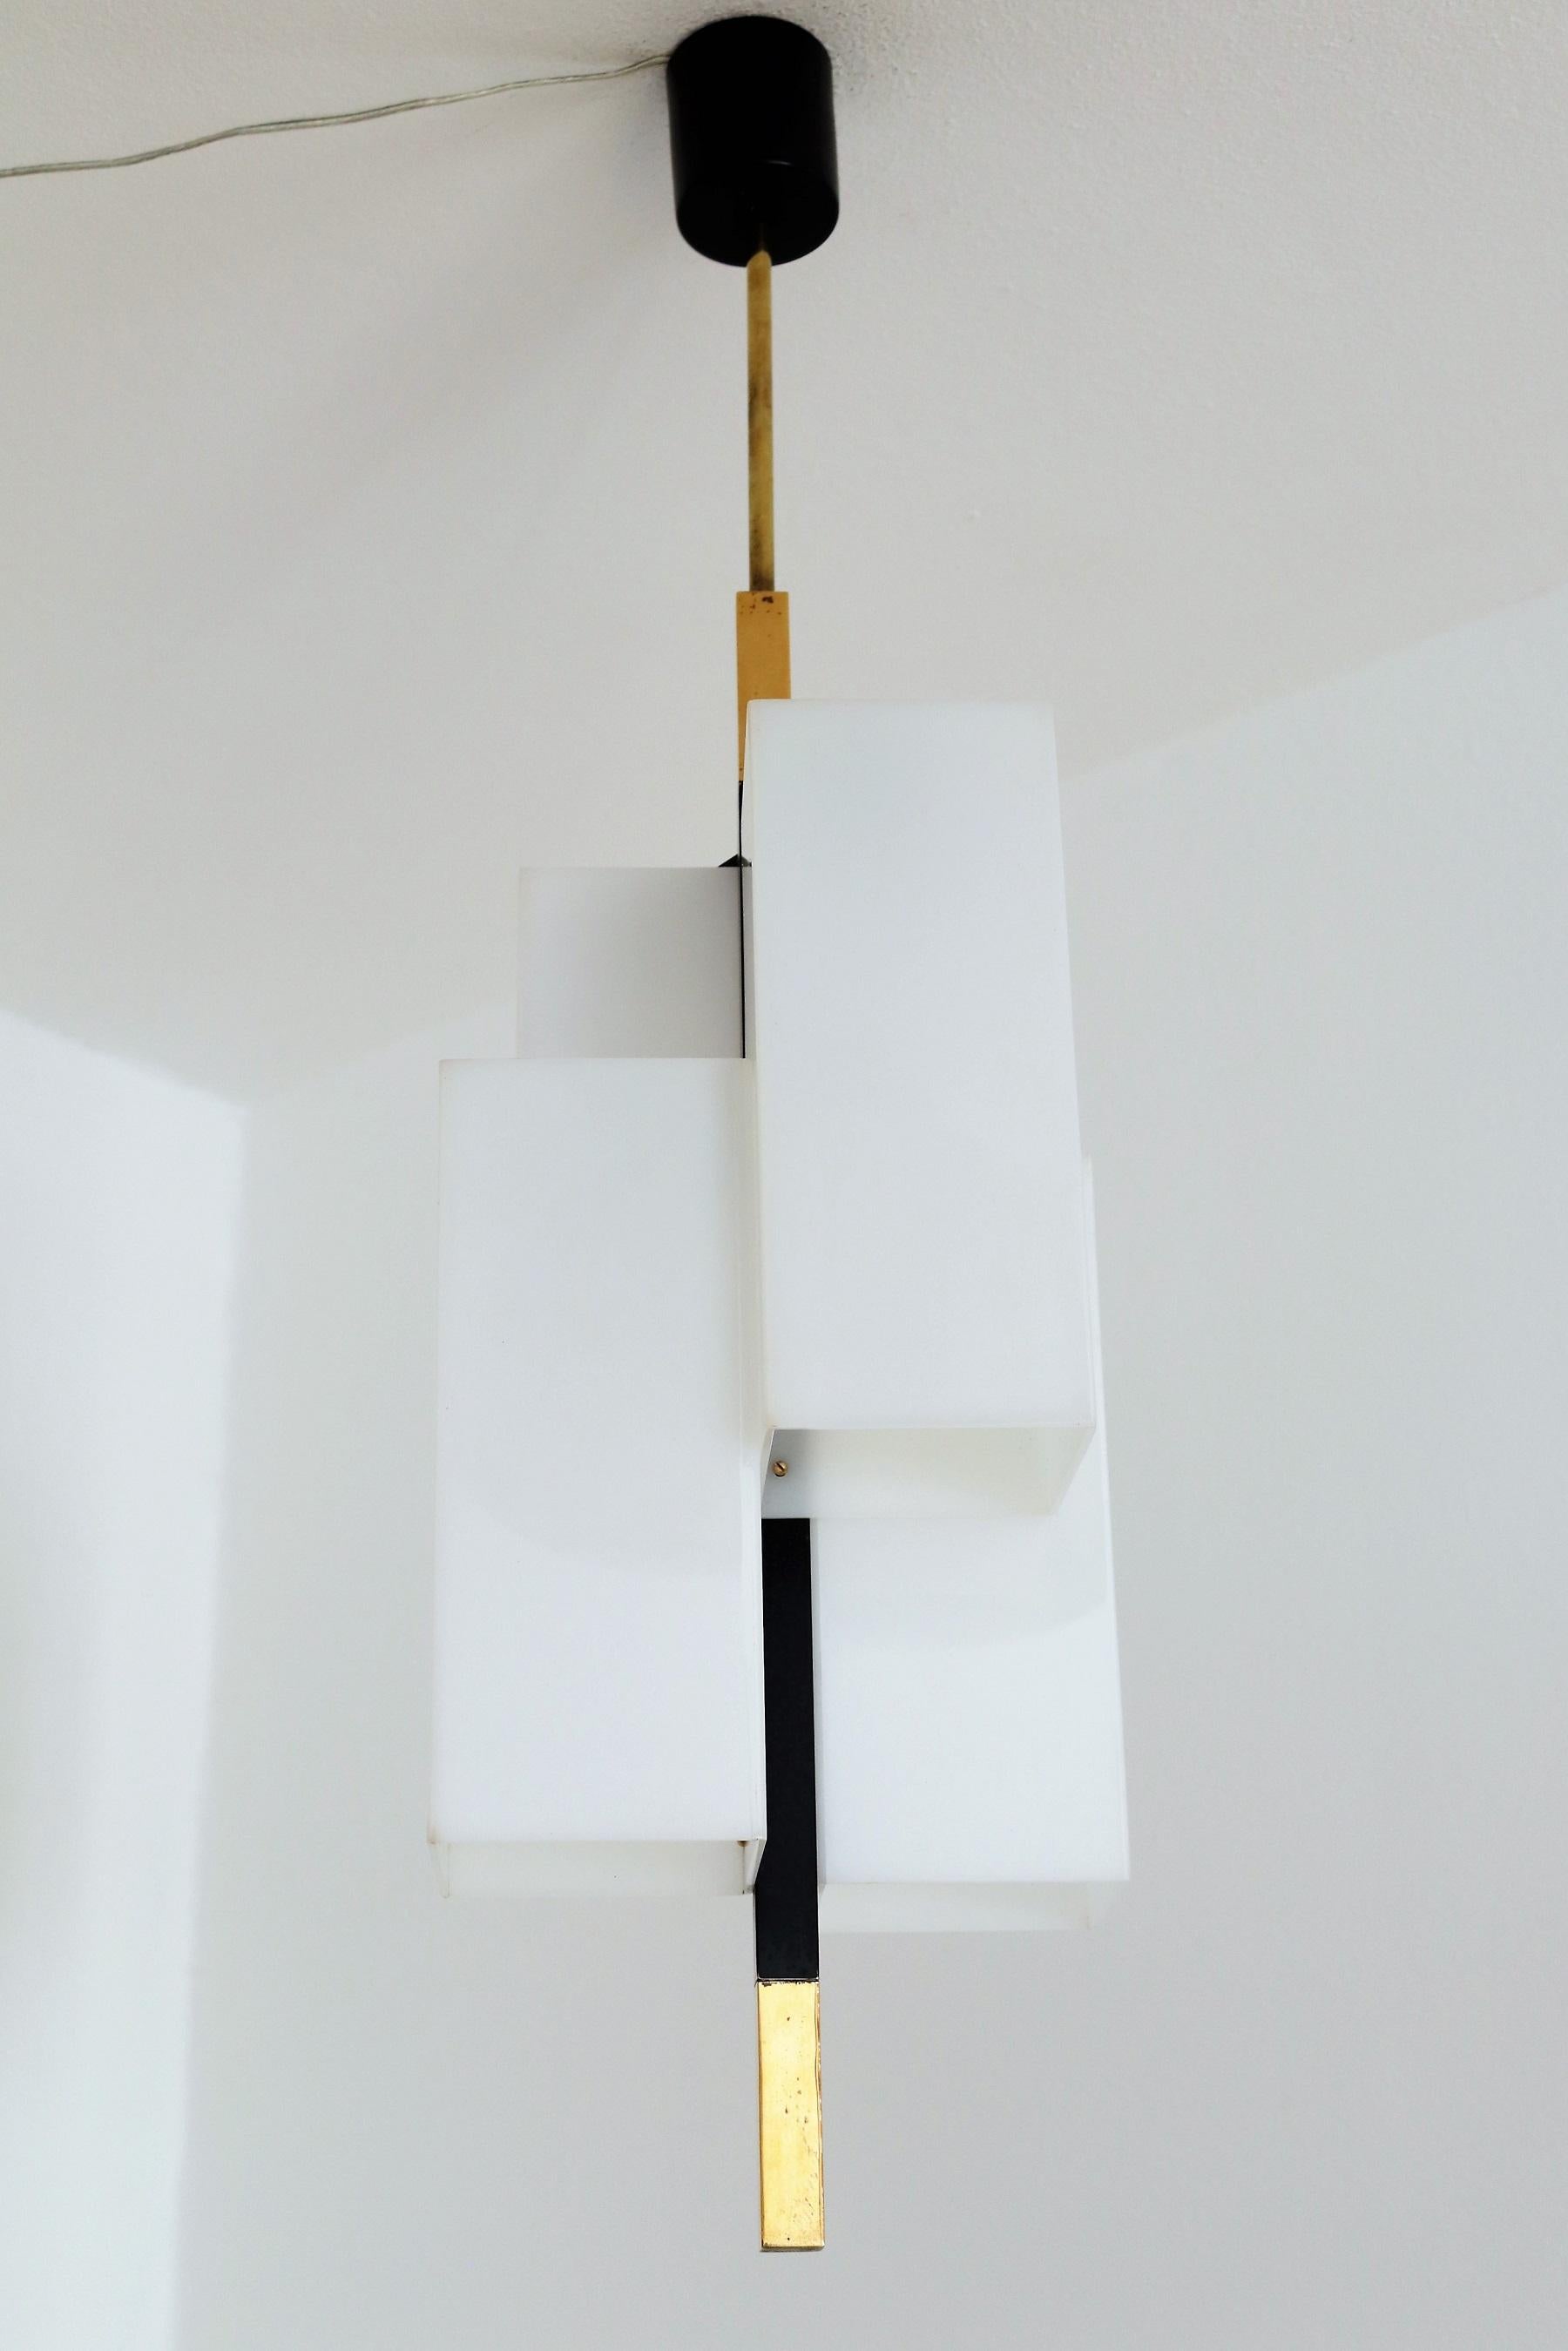 Italian Modern Pendant Light in Acrylic and Brass by Stilux Milano, 1970s For Sale 6